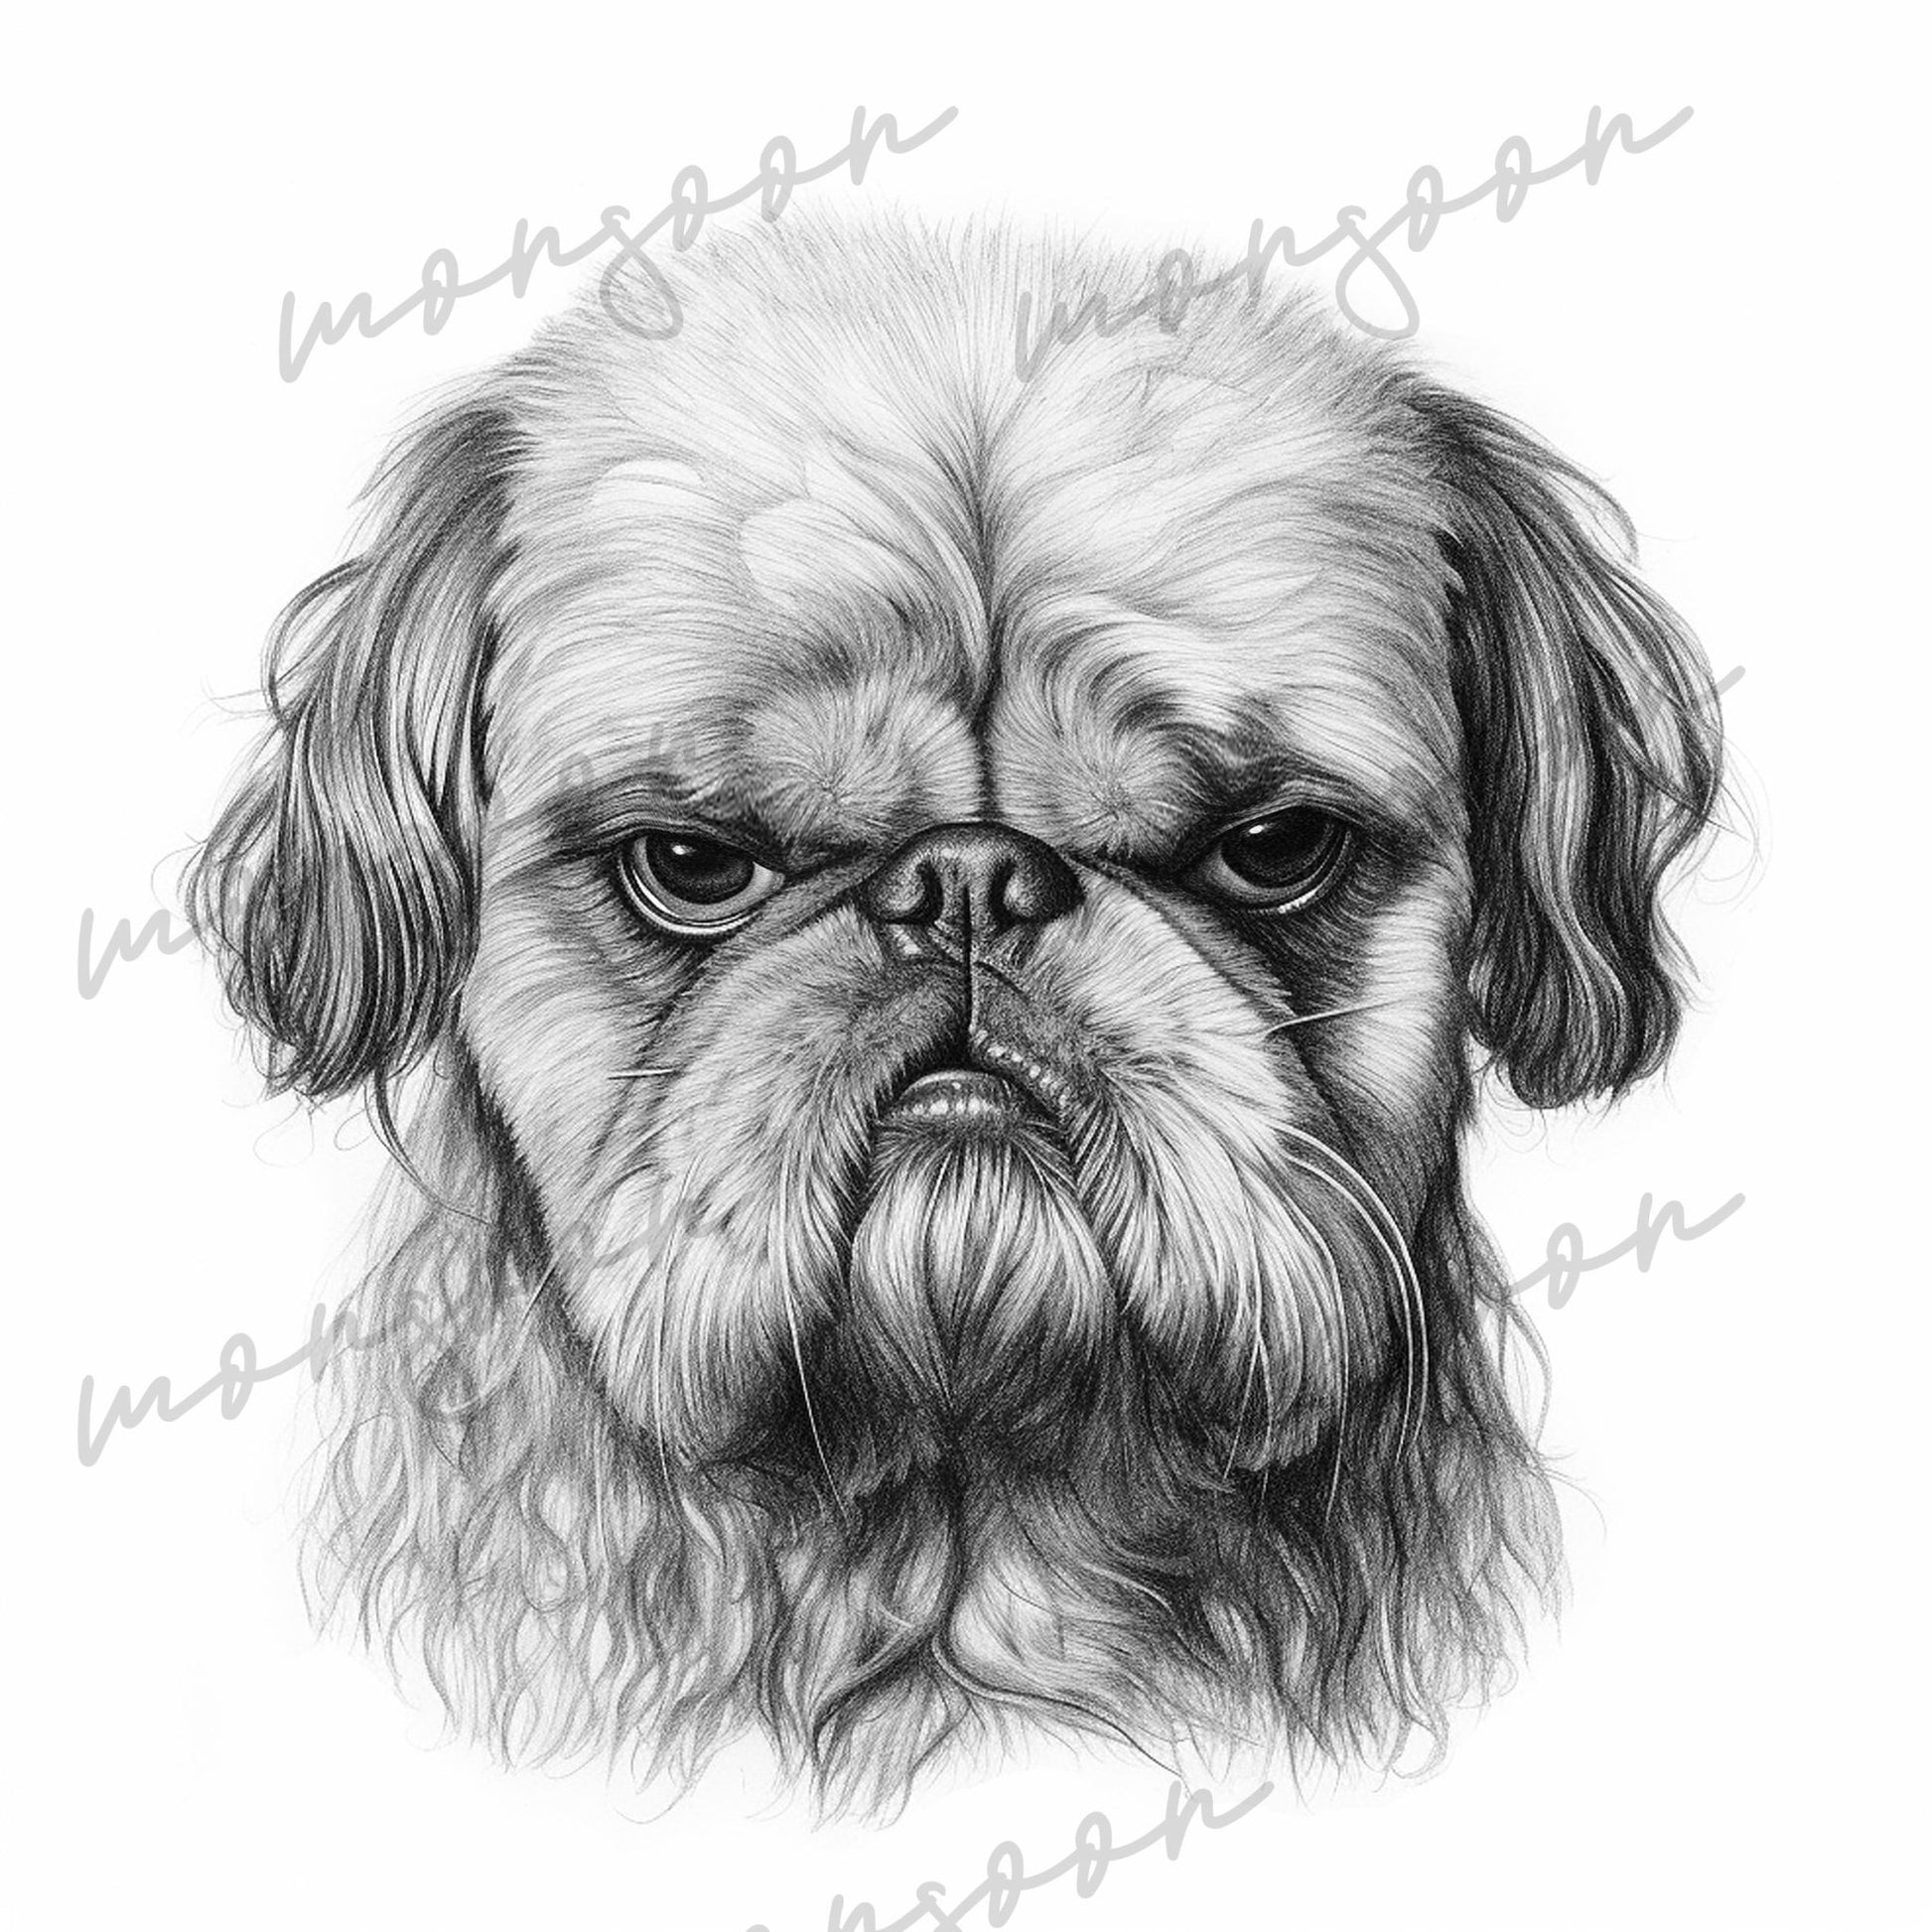 Grumpy Dogs Coloring Book Grayscale (Printbook) - Monsoon Publishing USA